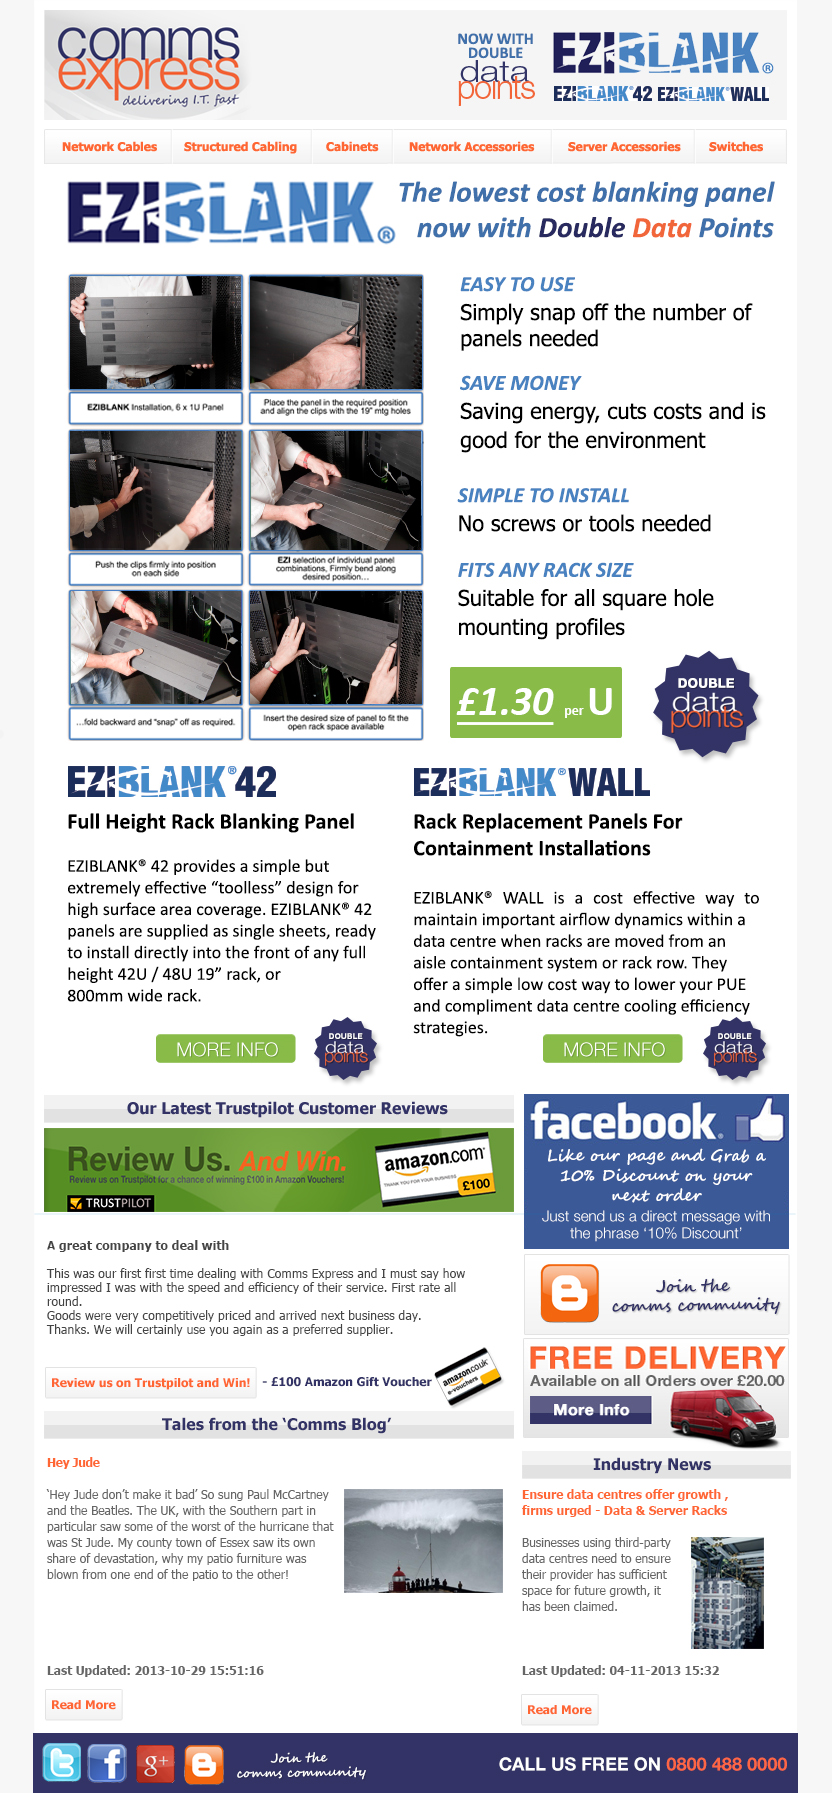 Introducing EziBlank The Lowest Cost Blanking Panel on 